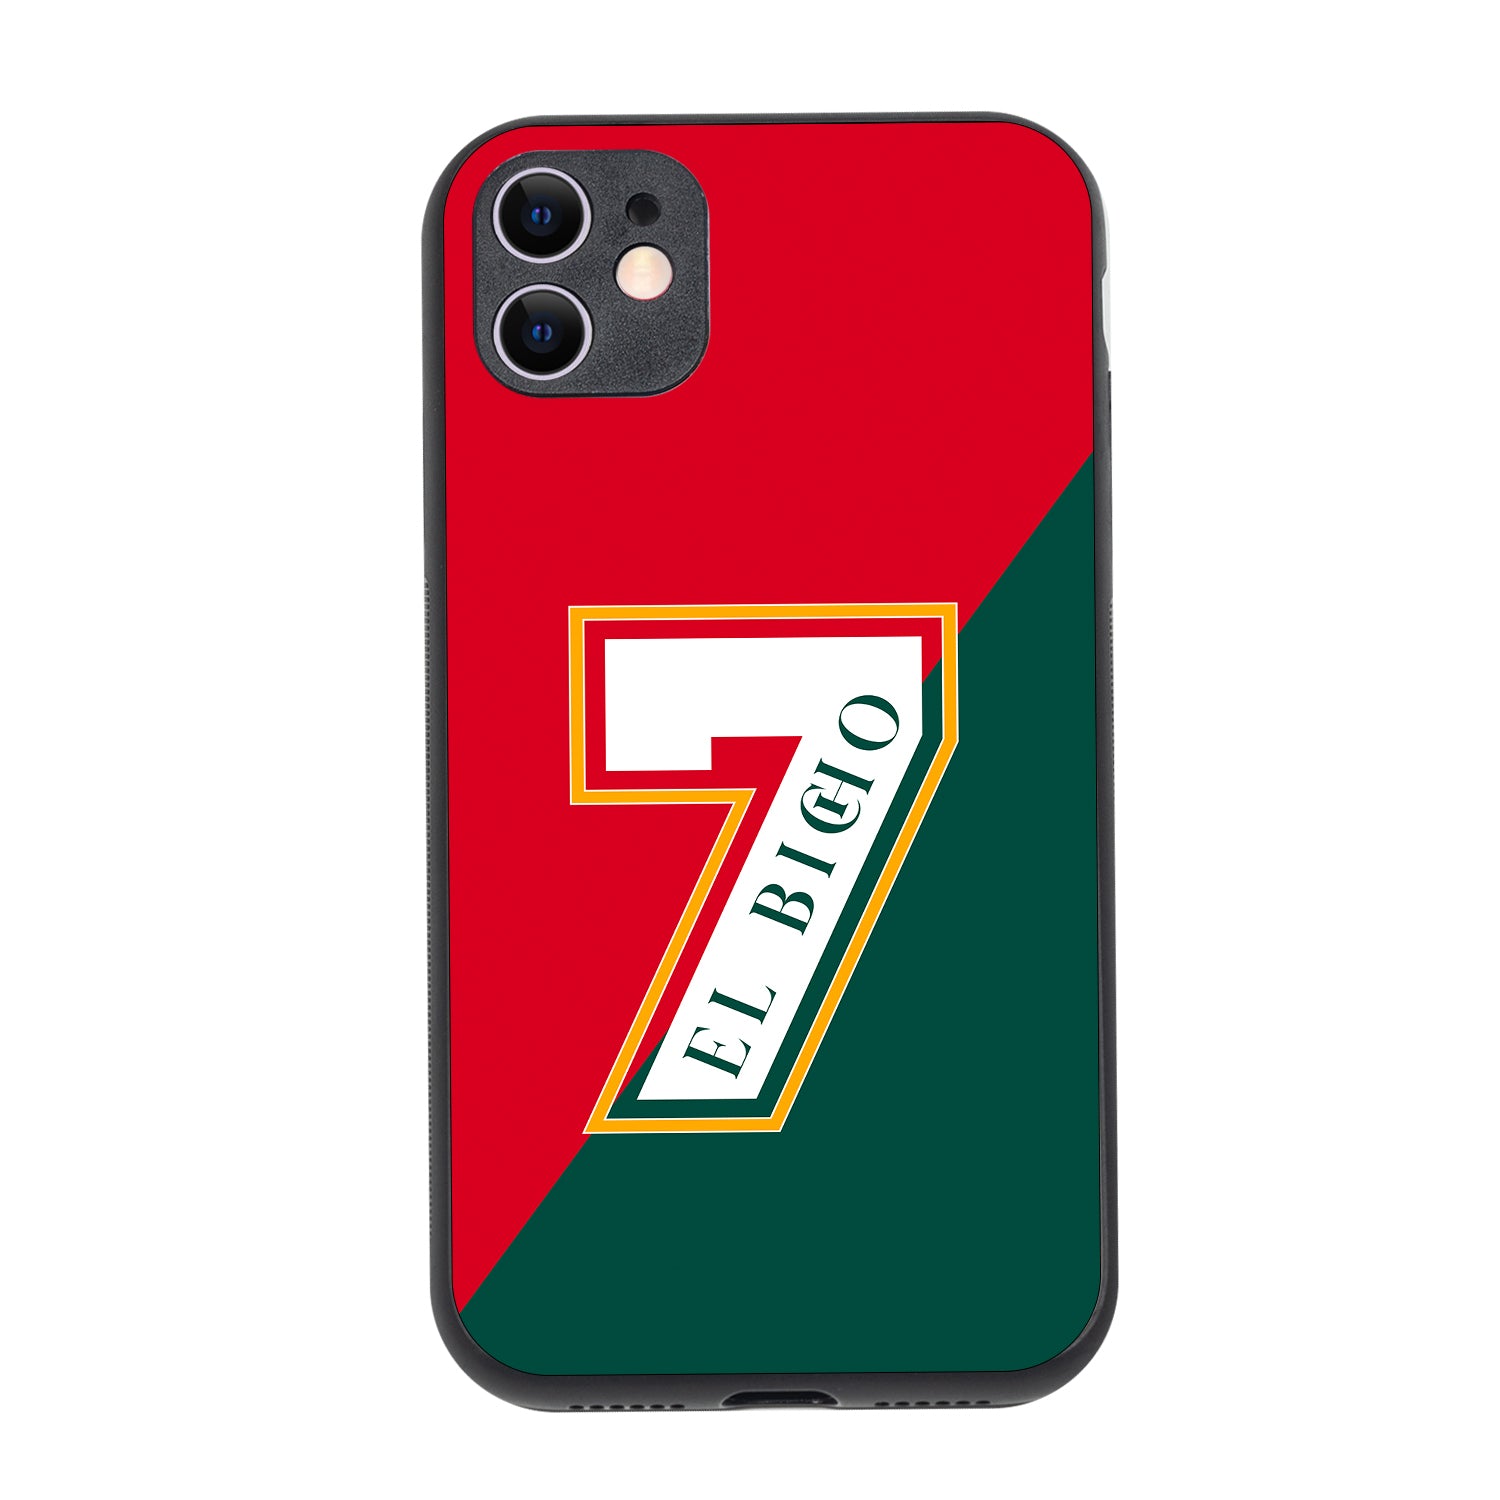 Jersey 7 Sports iPhone 11 Case